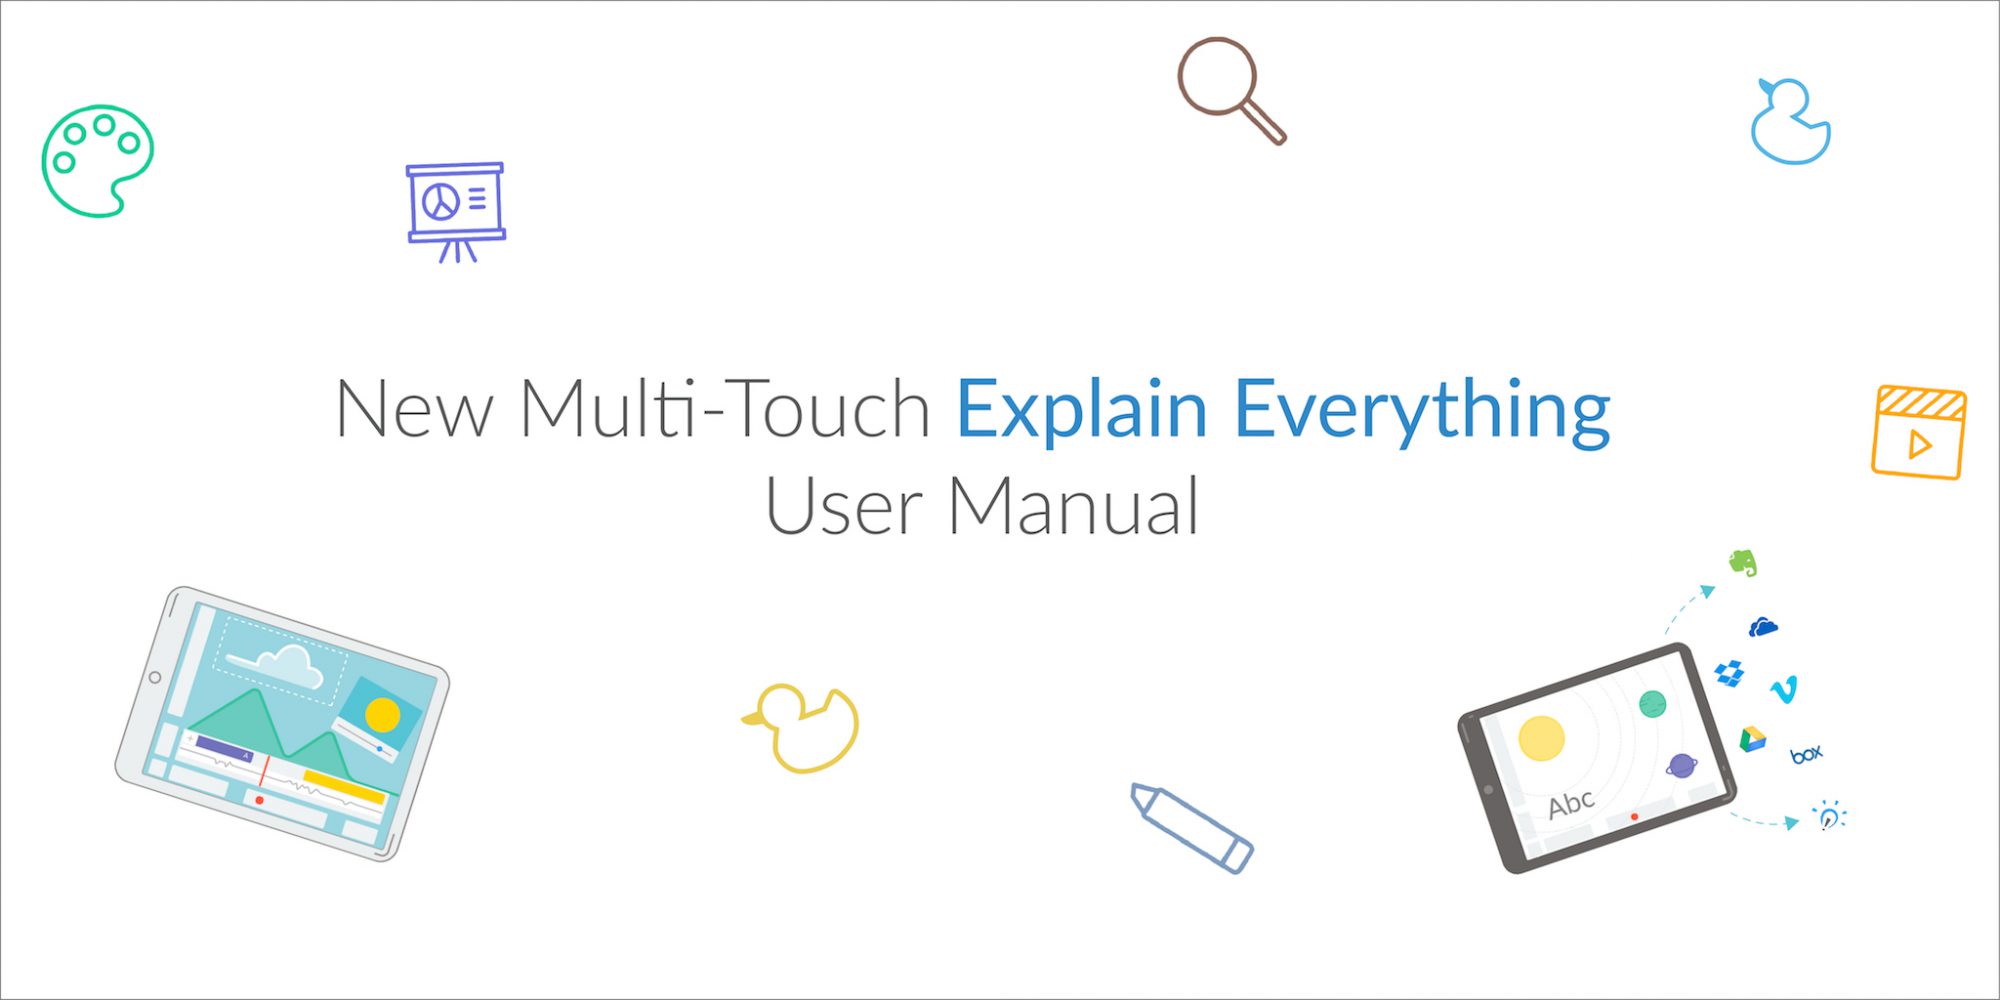 Multitouch iBook about Explain Everything